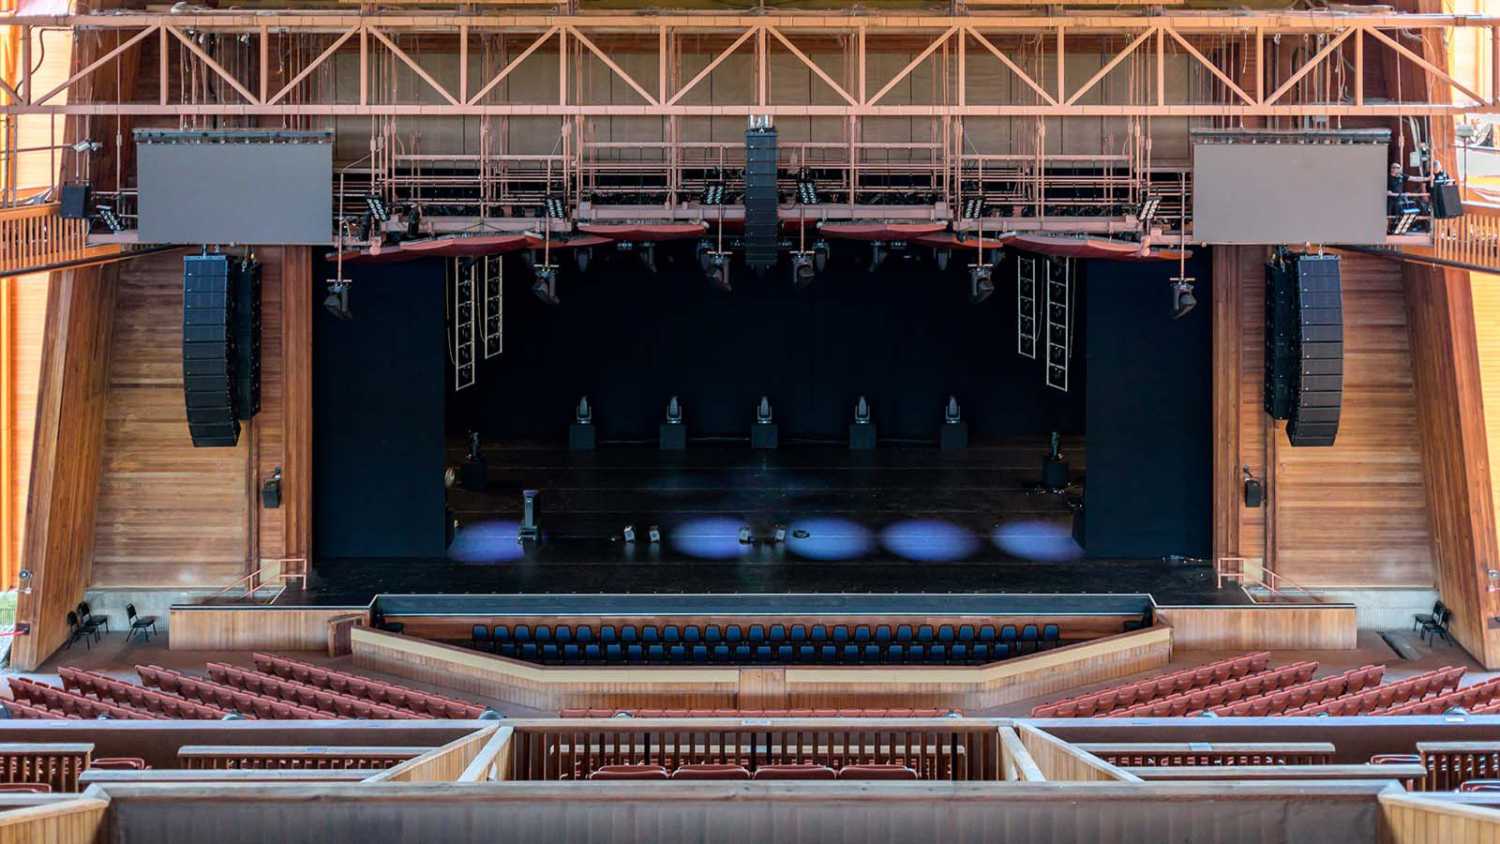 The non-profit Wolf Trap Foundation, recently replaced the aging main audio system